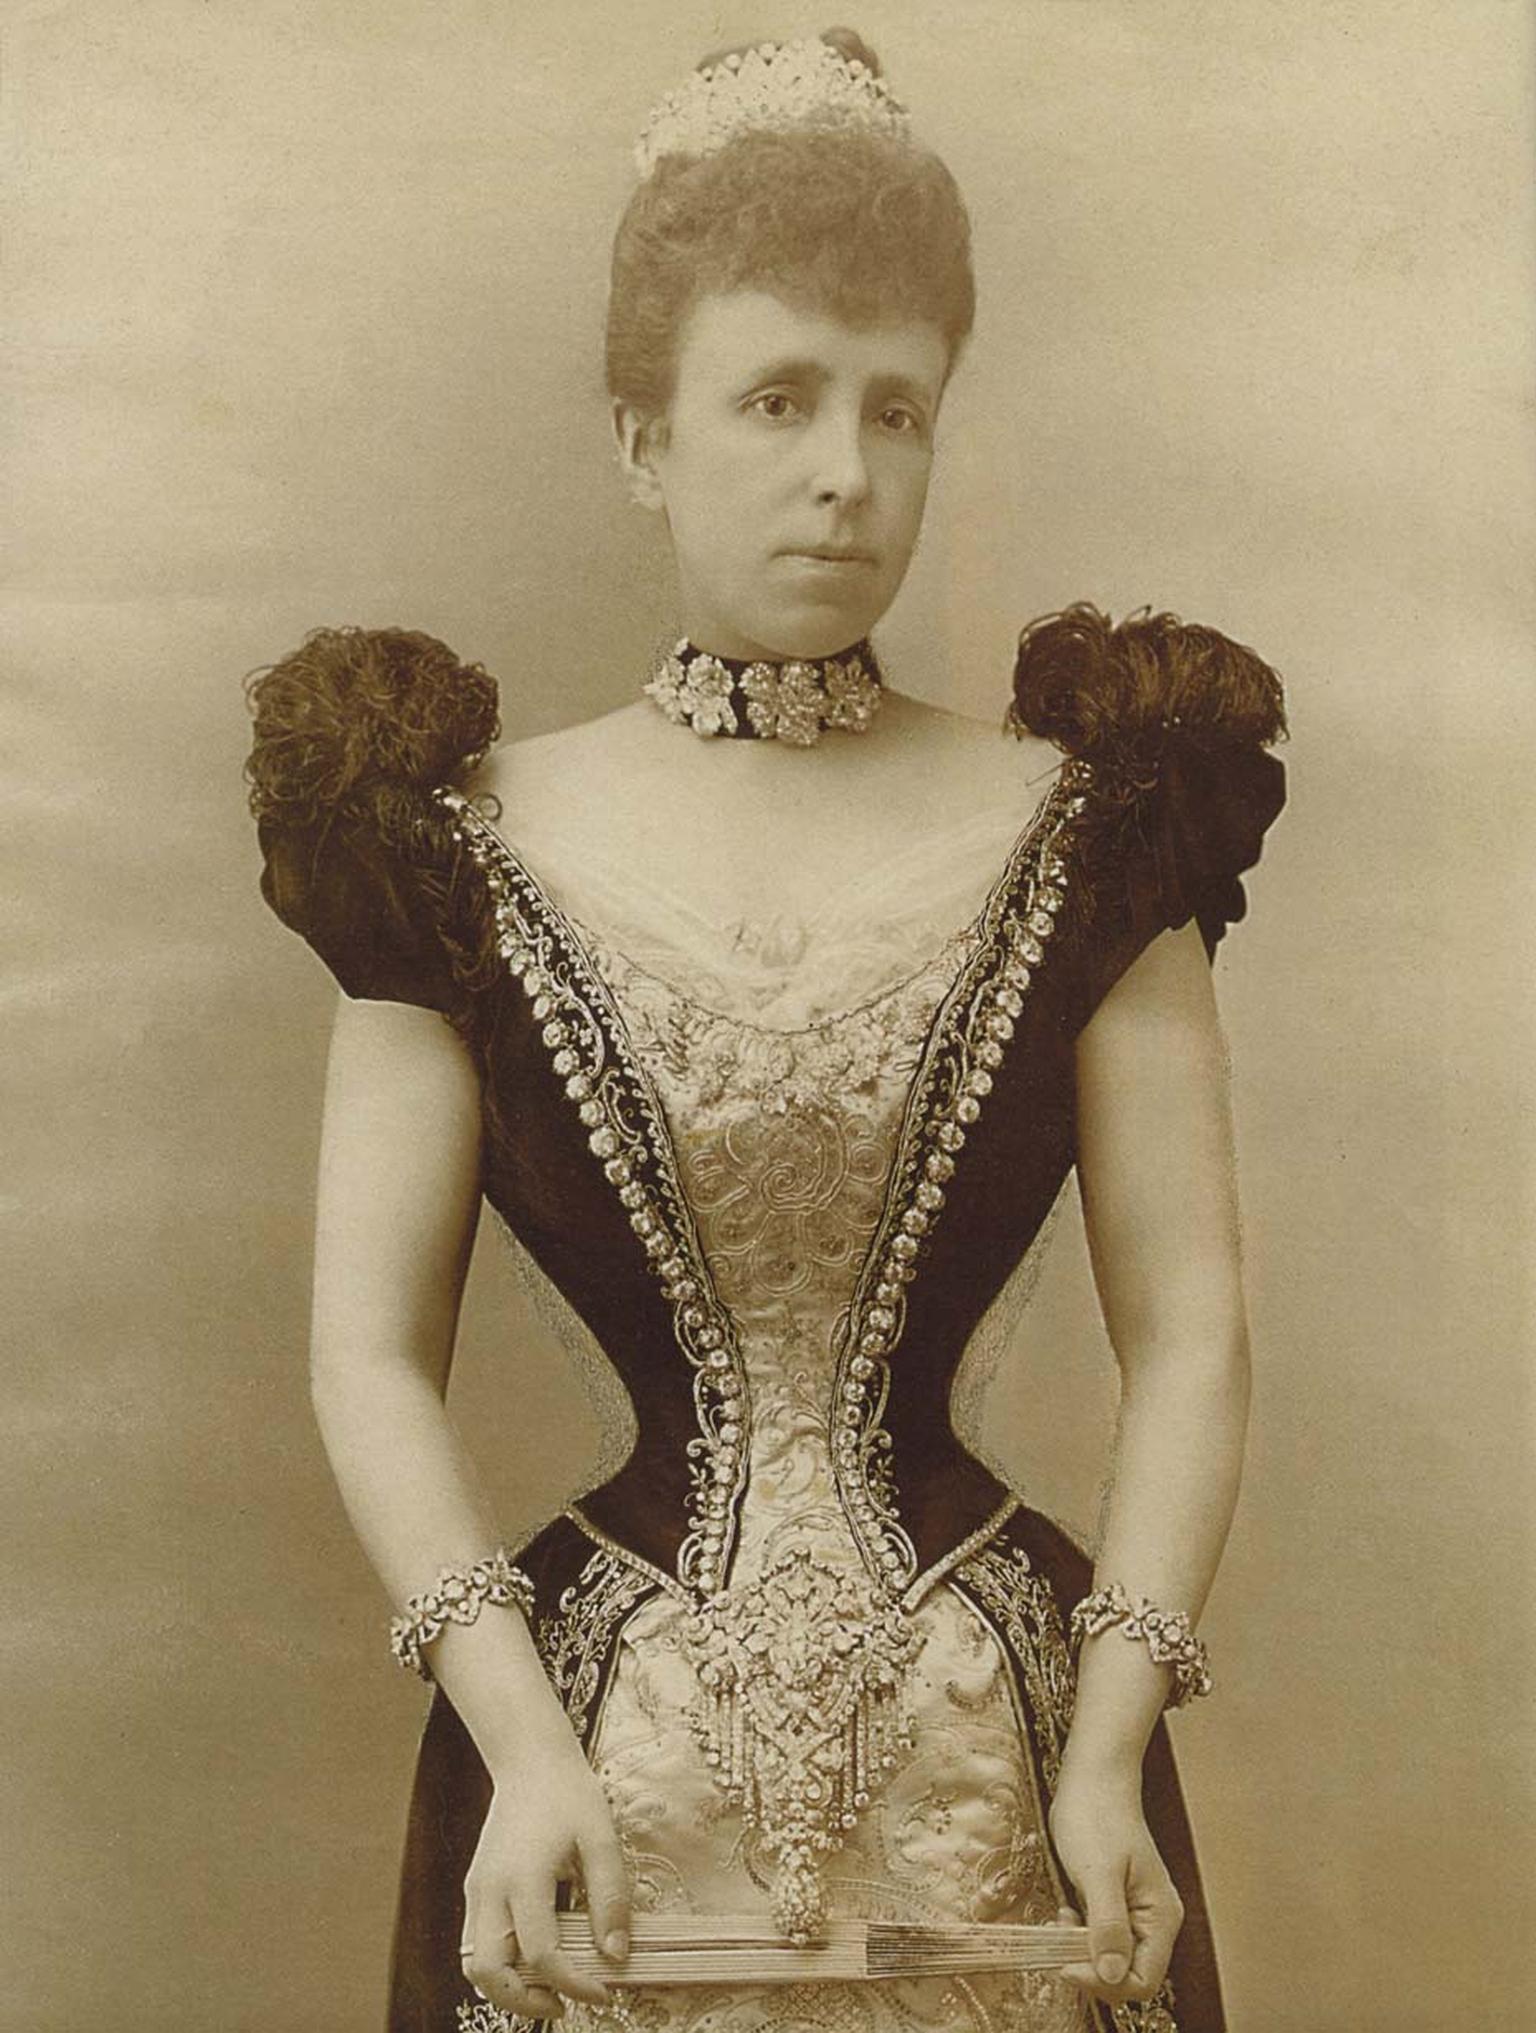 The Archduchess Maria Christina of Austria pictured in 1879 wearing the Maria Christina Royal Devant-de-Corsage diamond brooch, which was given to her as a wedding present by King Alfonso XII of Spain.